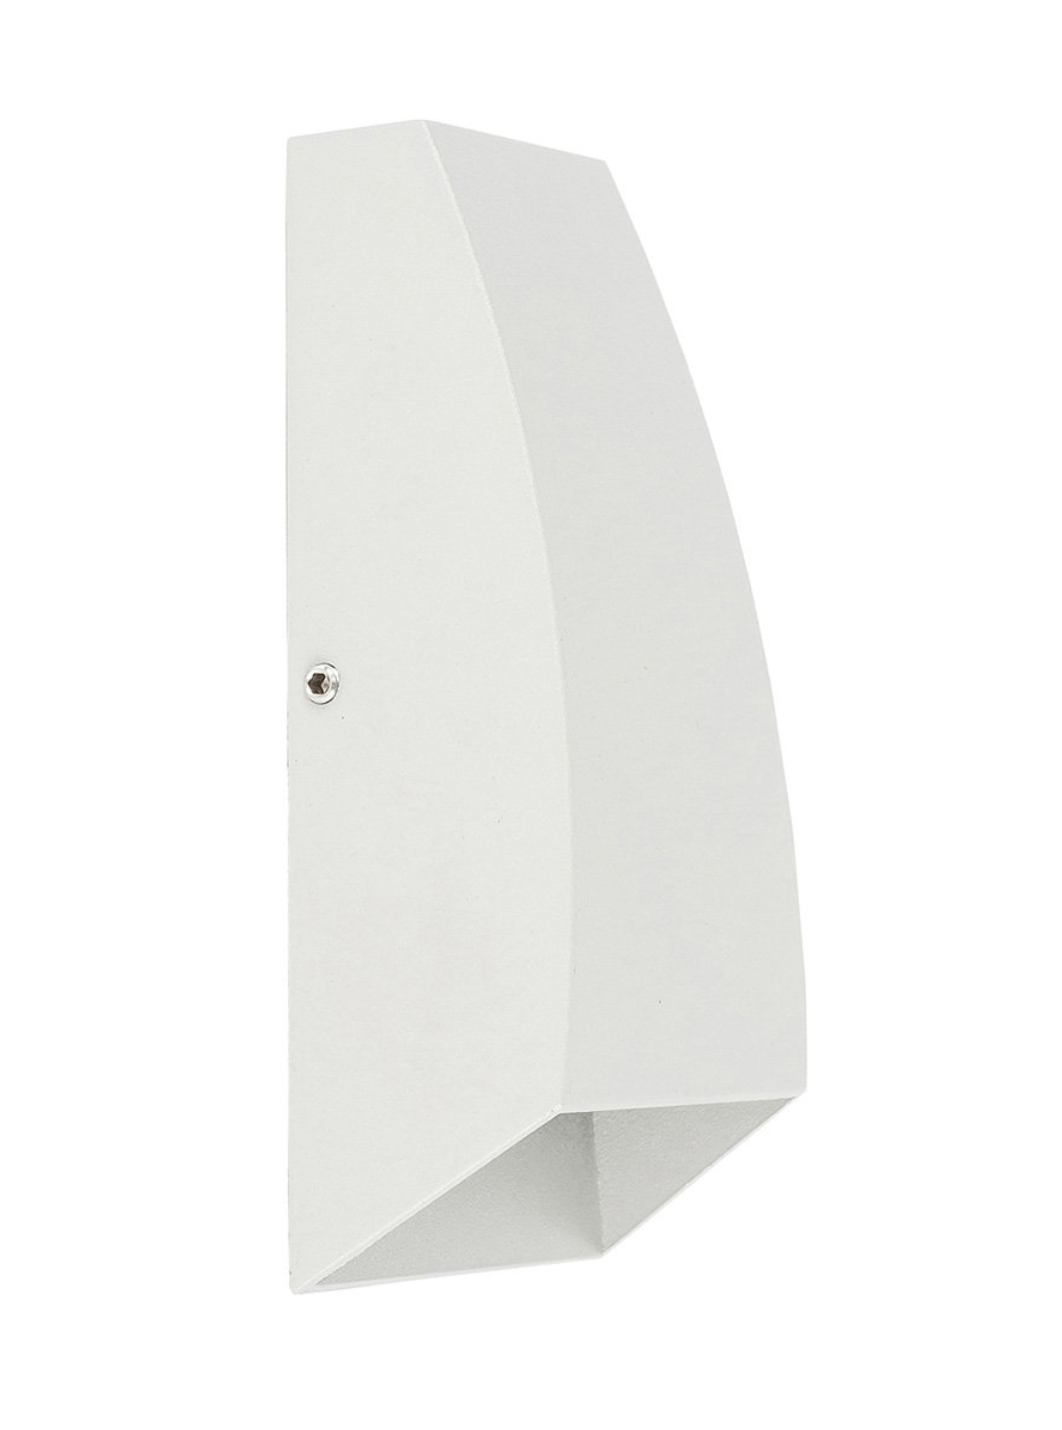 Exterior Wall Light Cono - Up / Down Wall Lighting Shops